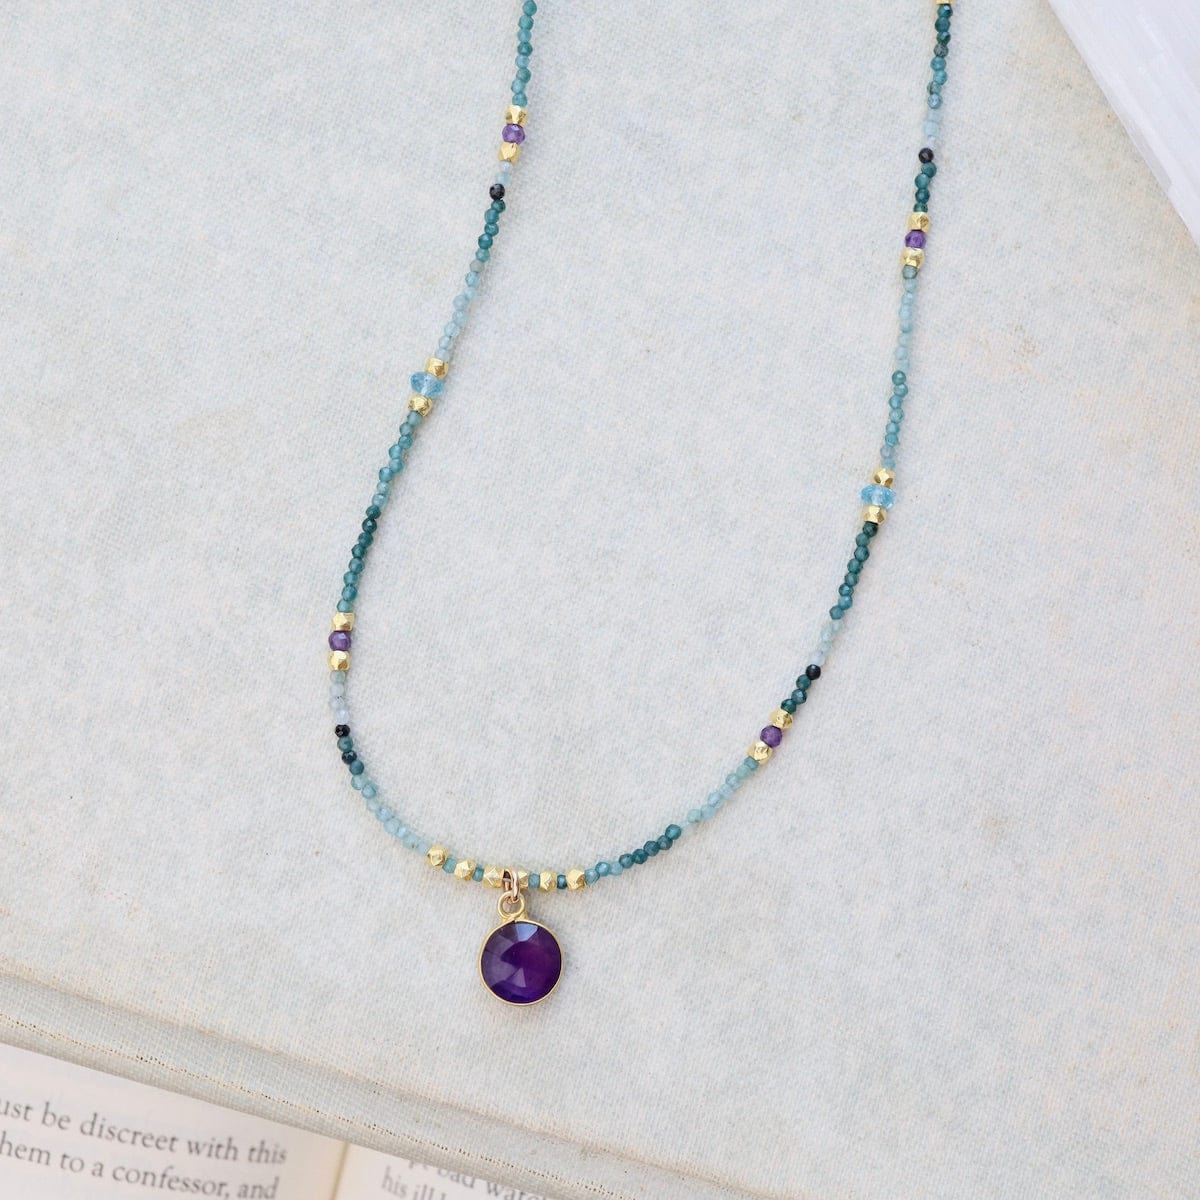 NKL-VRM Amethyst Coin On Apatite Mix Necklace